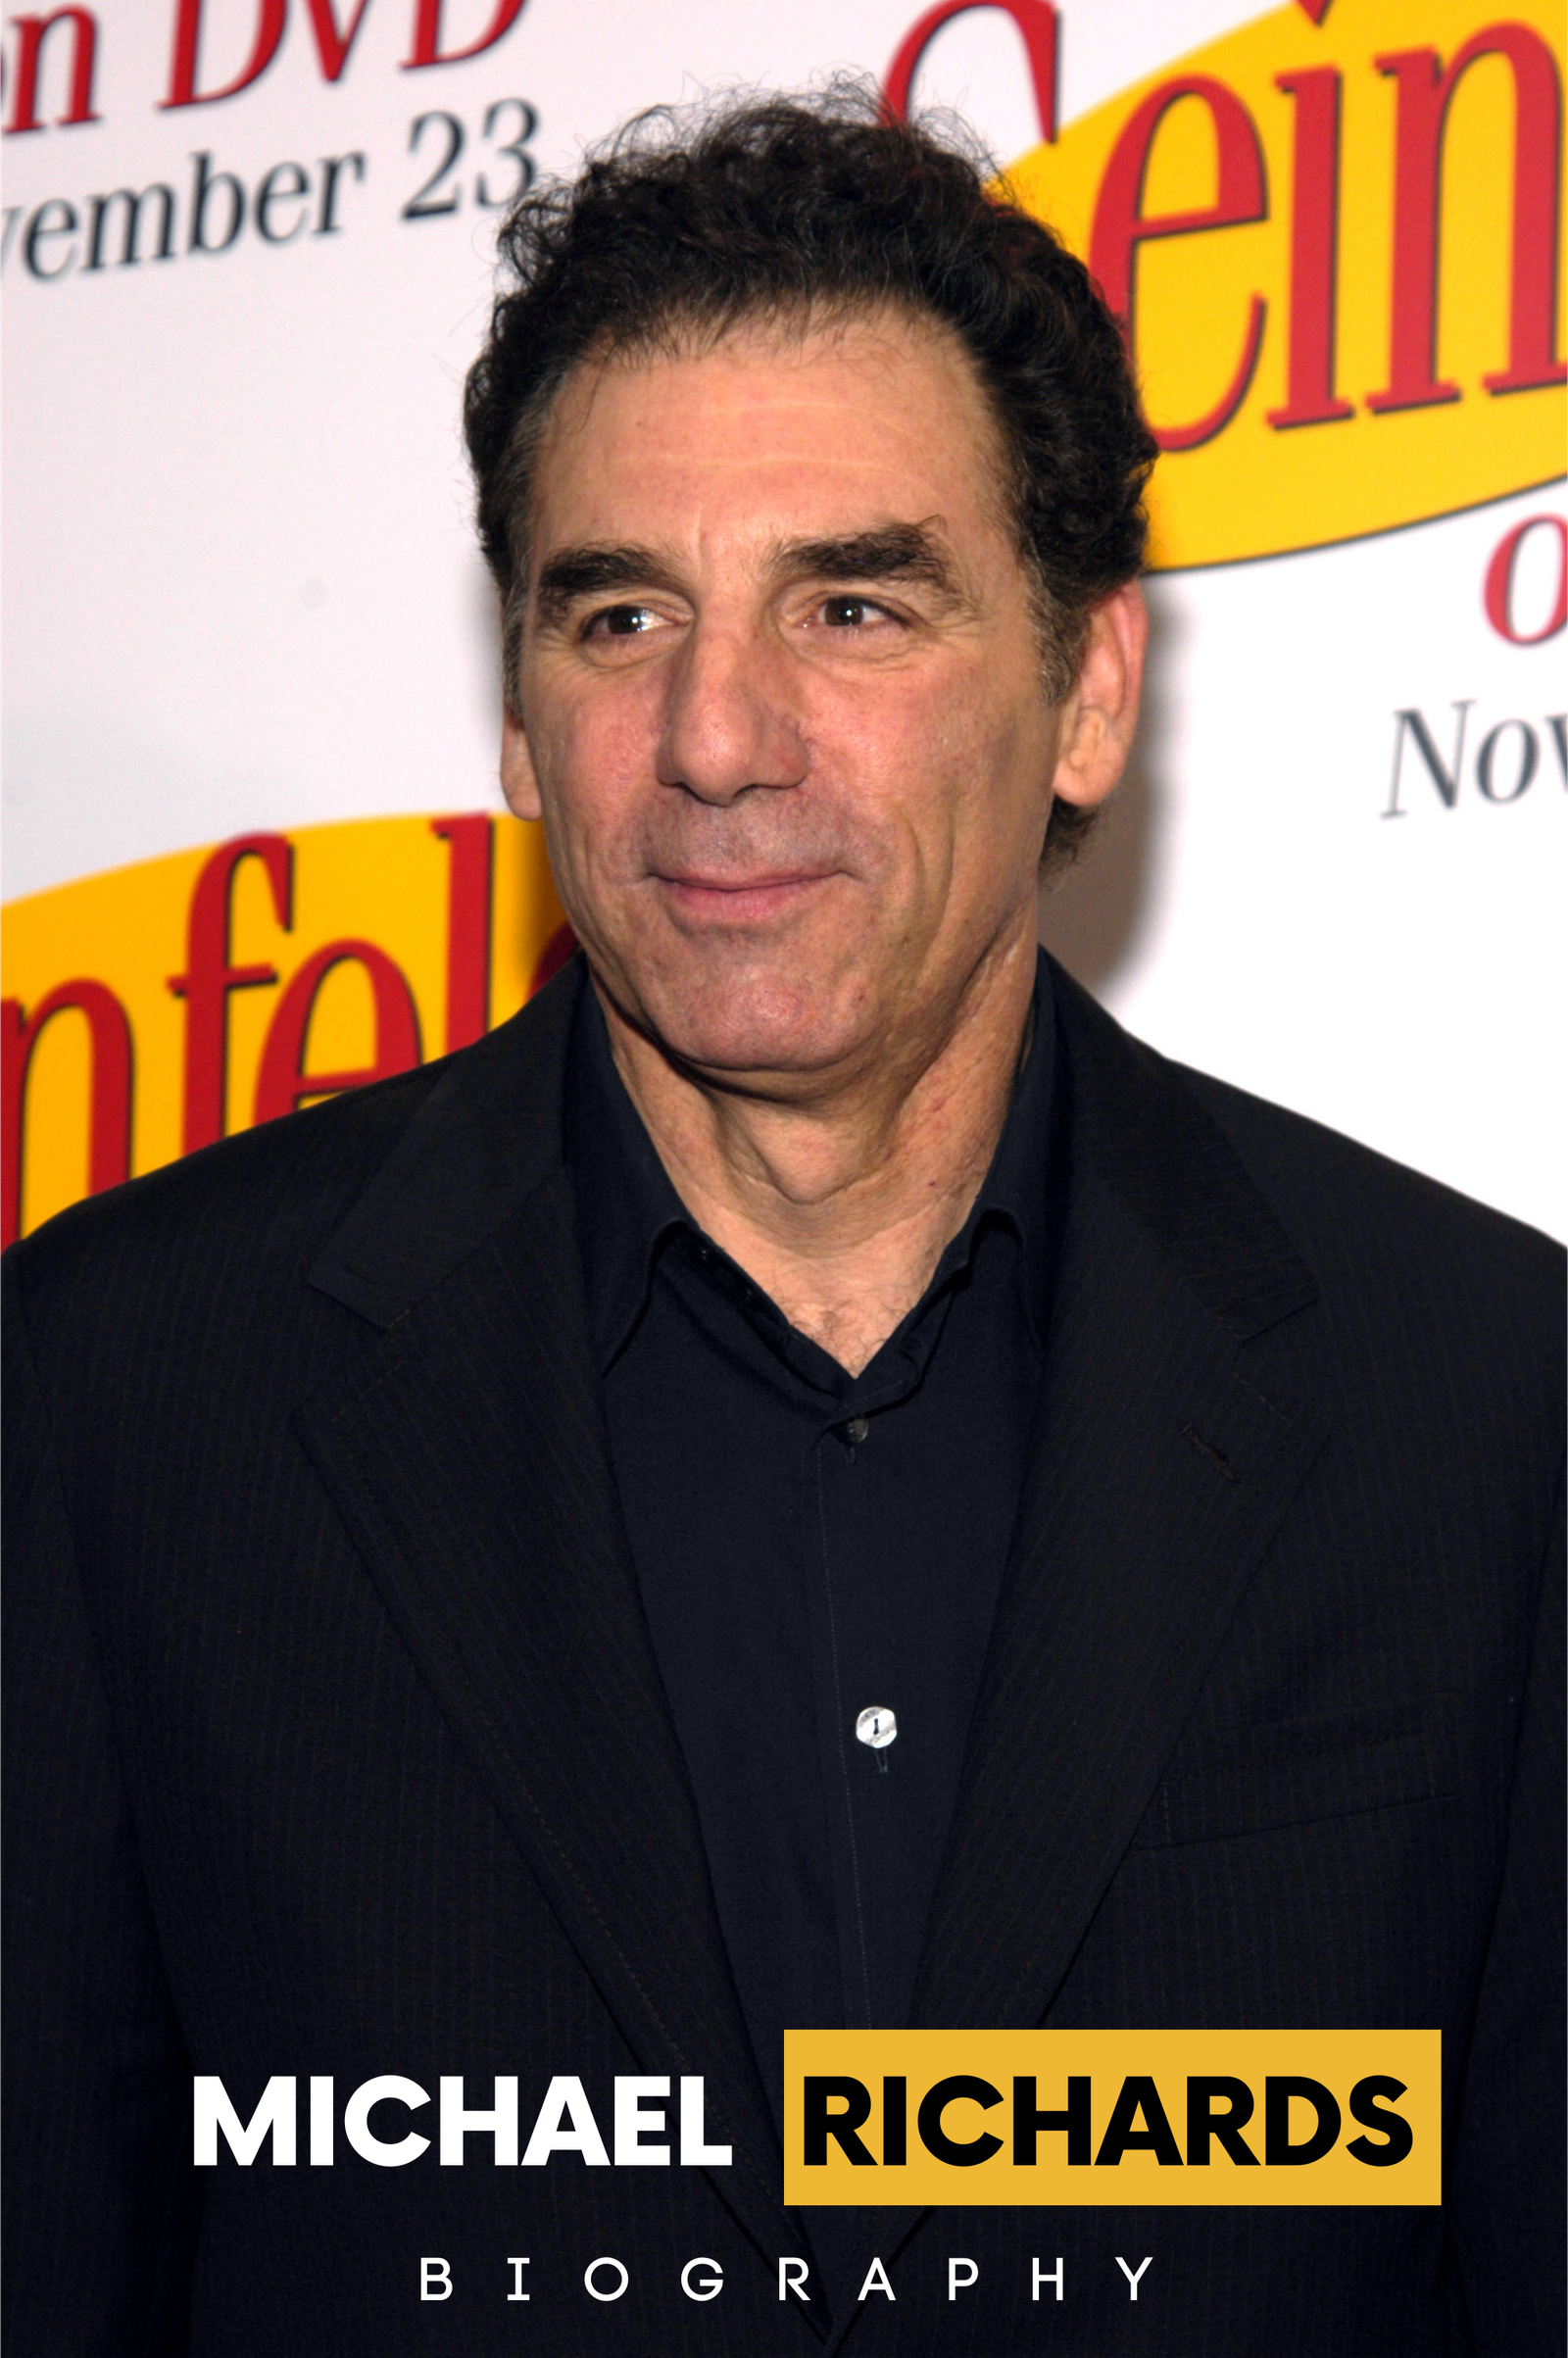 What Is Michael Richards’ Current Net Worth? What happened in 2006 that ‘cancelled’ him?